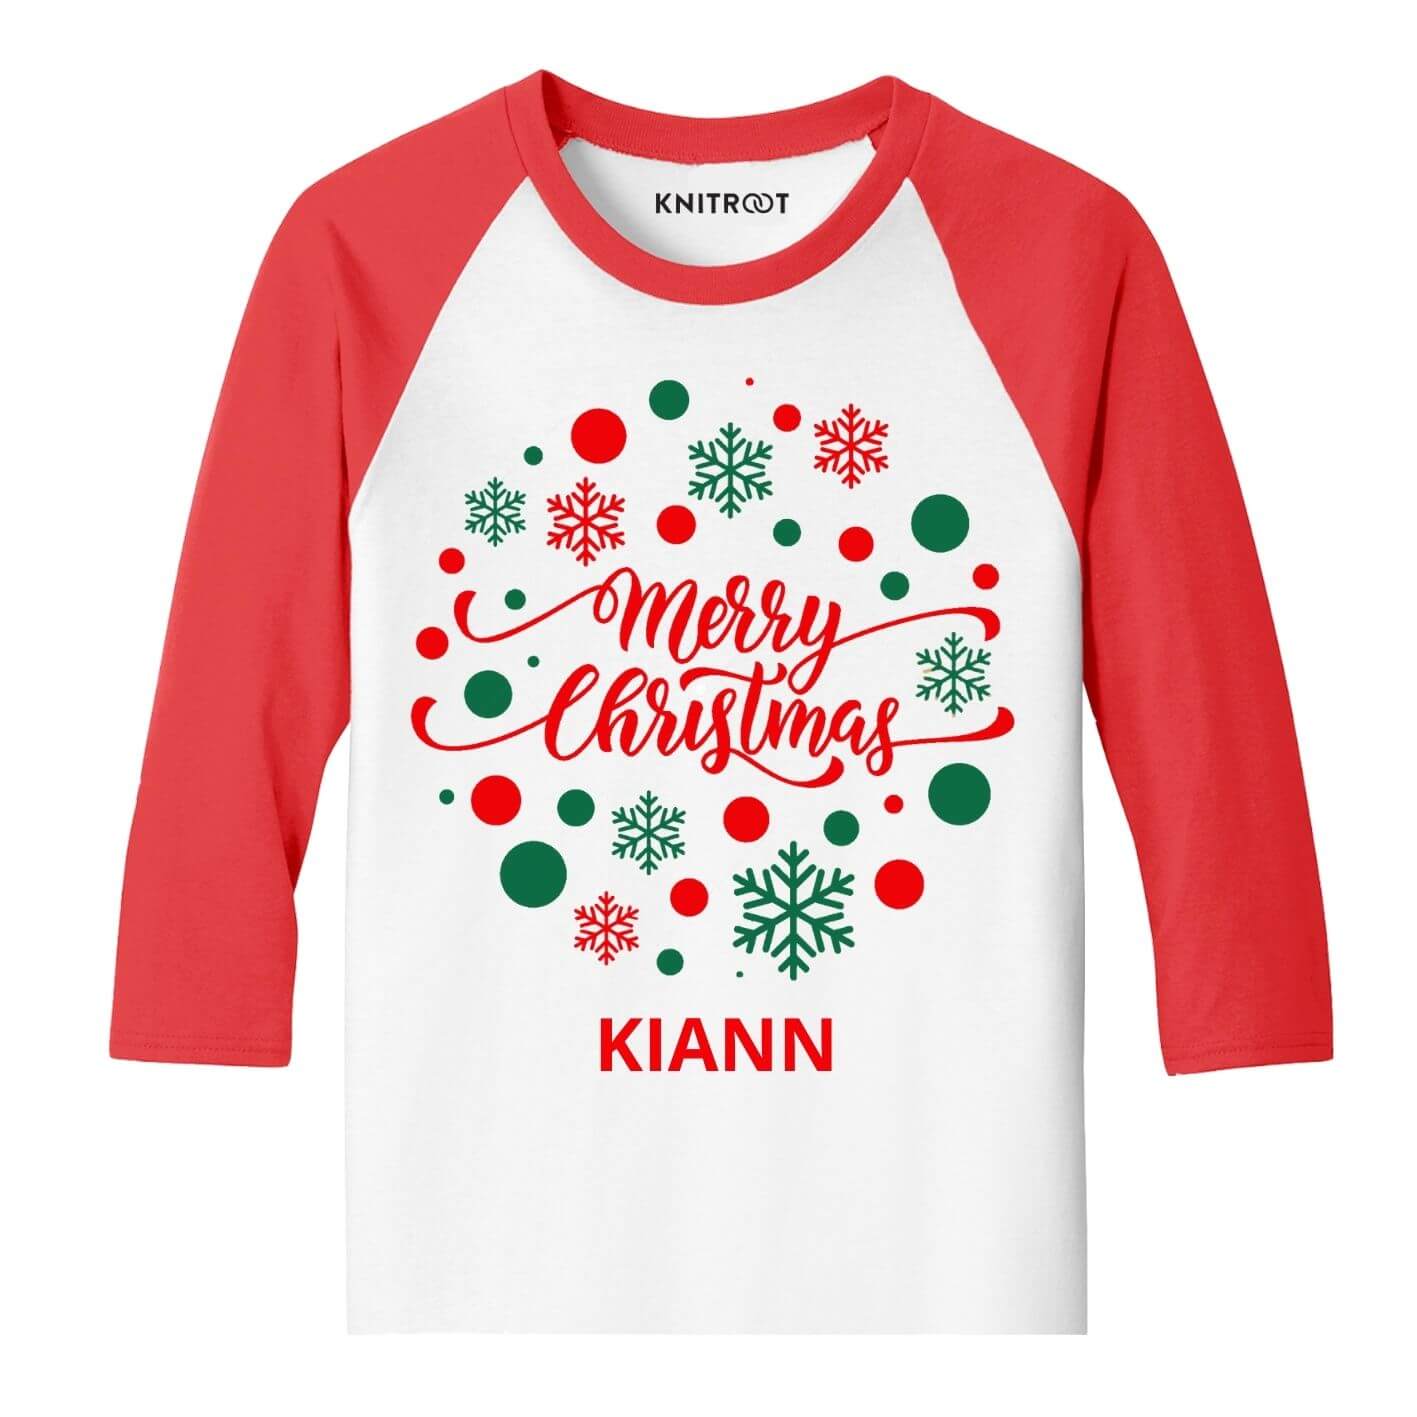 assembly More than anything Couple Santa T shirt & Onesie | Customized Christmas Clothes For Baby | KNITROOT